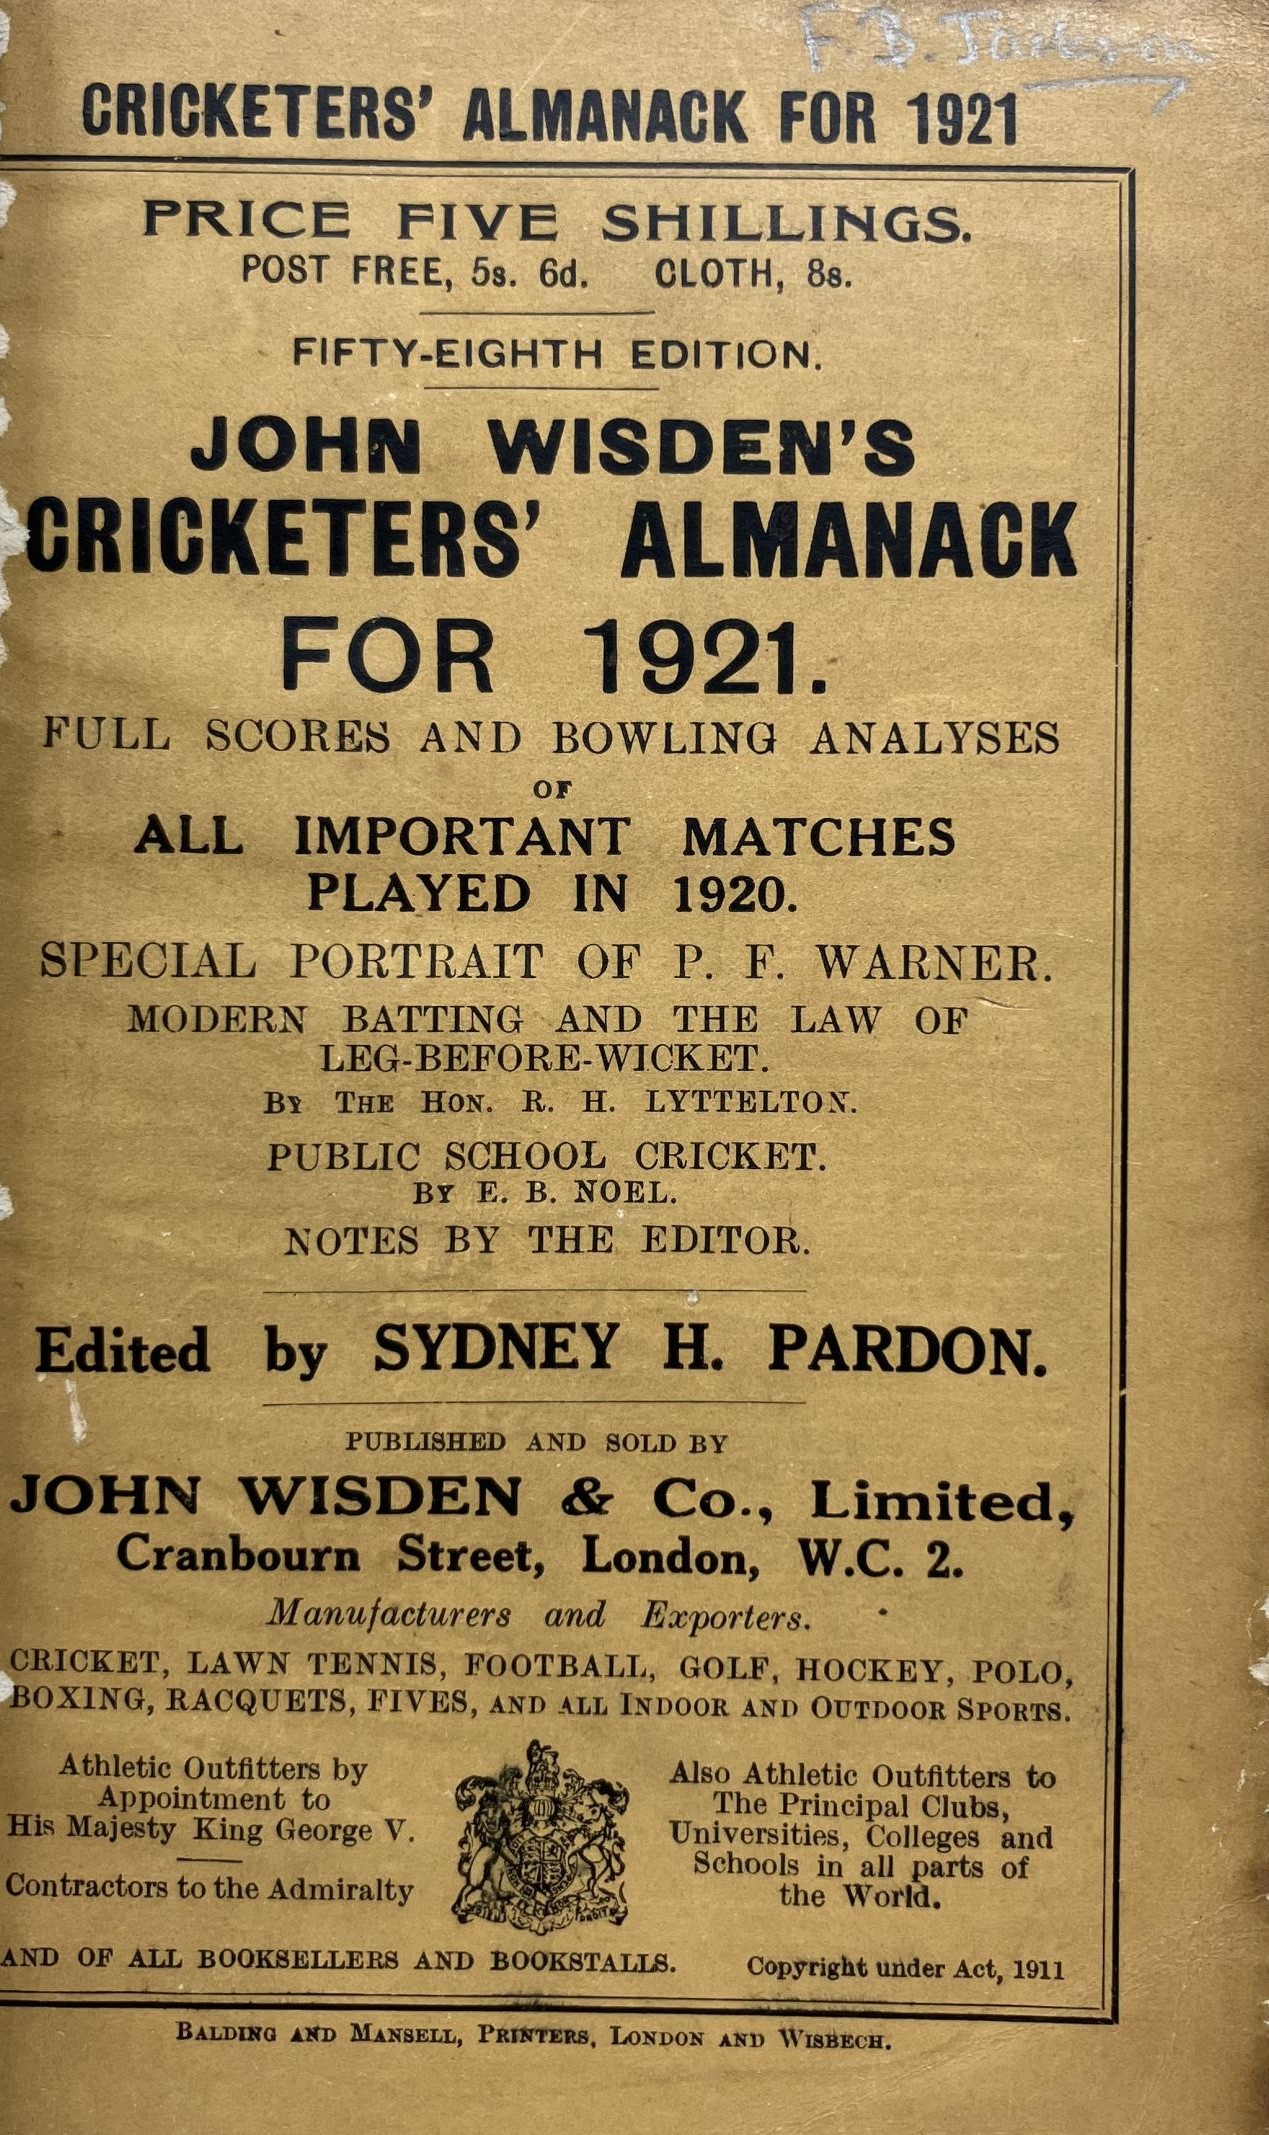 A Wisden Cricketers' Almanack, 1921 Provenance:  From the Harry Brewer Cricket Memorabilia - Image 3 of 4